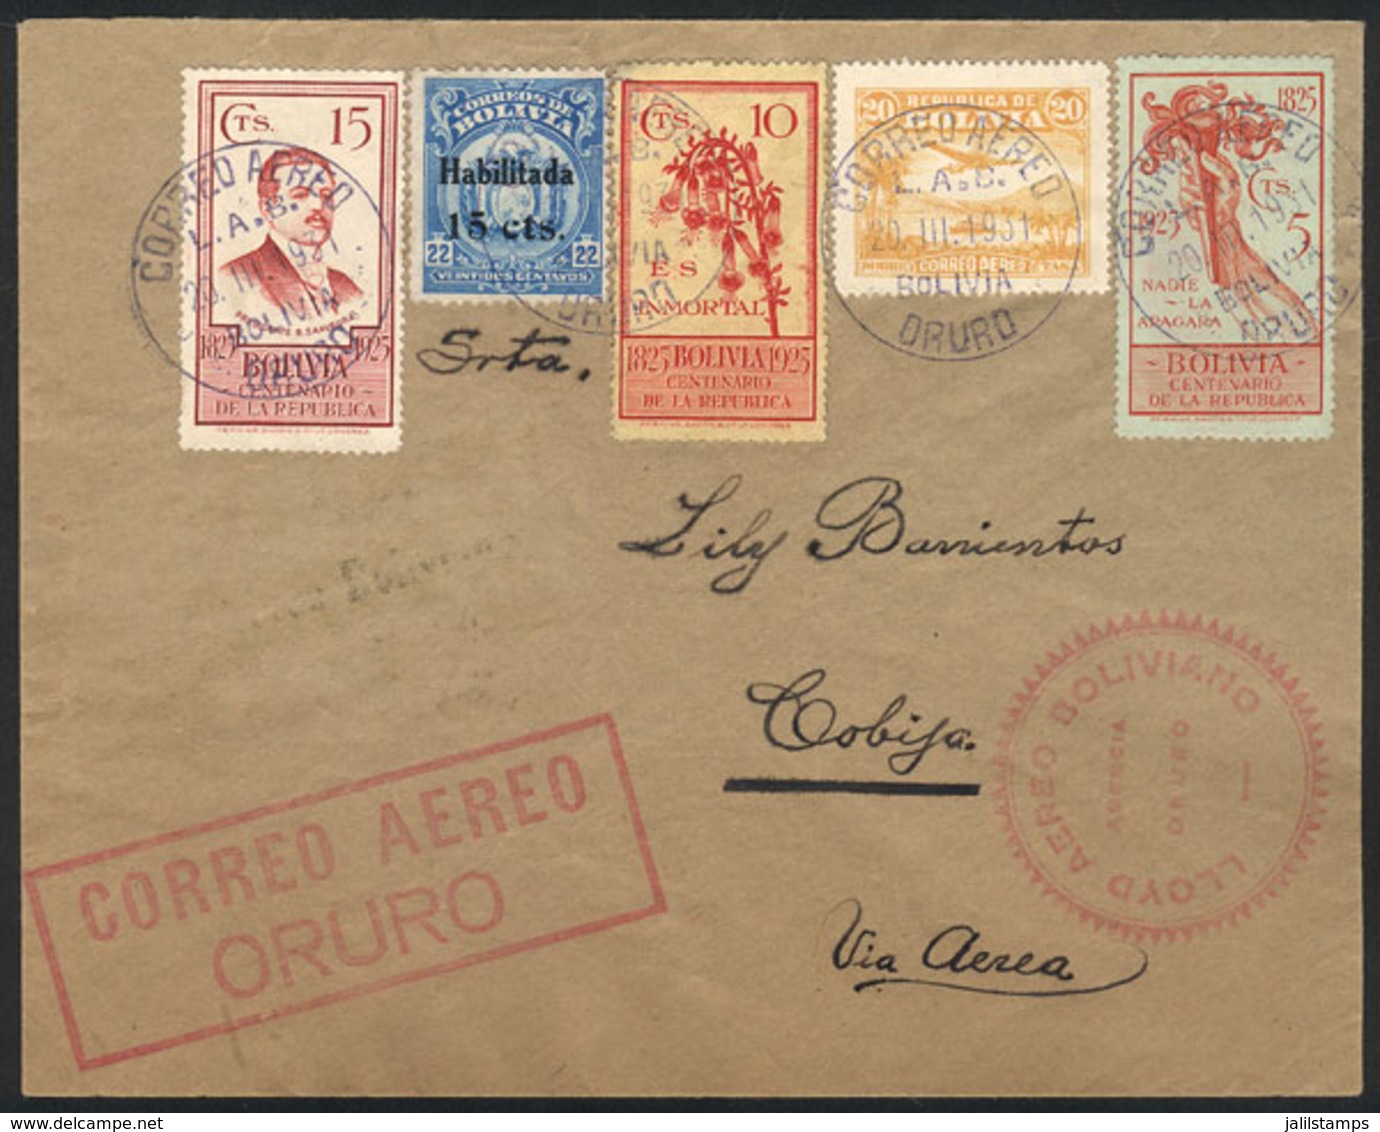 847 BOLIVIA: Cover Flown From Oruro To Riveralta On 20/MAR/1931 By LAB And From There To Final Destination (Cobija) By L - Bolivien